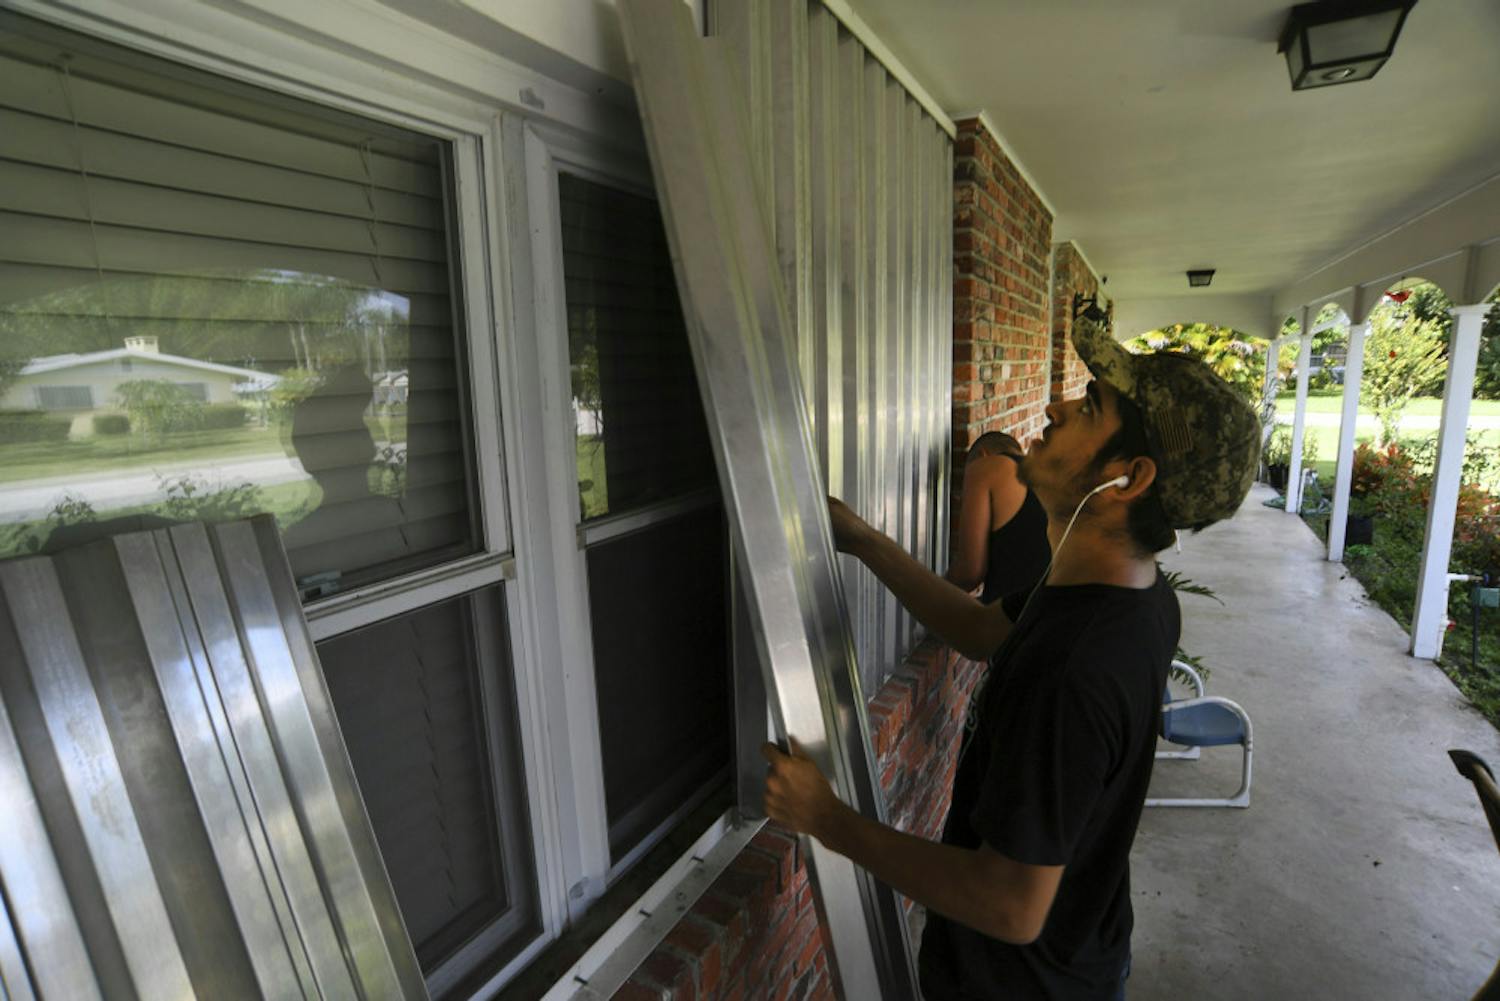 Richard Henson (foreground) and his uncle, Peter Henson, prepare their grandmother's house Thursday, Aug. 29, 2019, where she lives on Greenwood Drive in Fort Pierce, Fla., for the arrival of Hurricane Dorian. (Eric Hasert/TCPalm.com via AP)